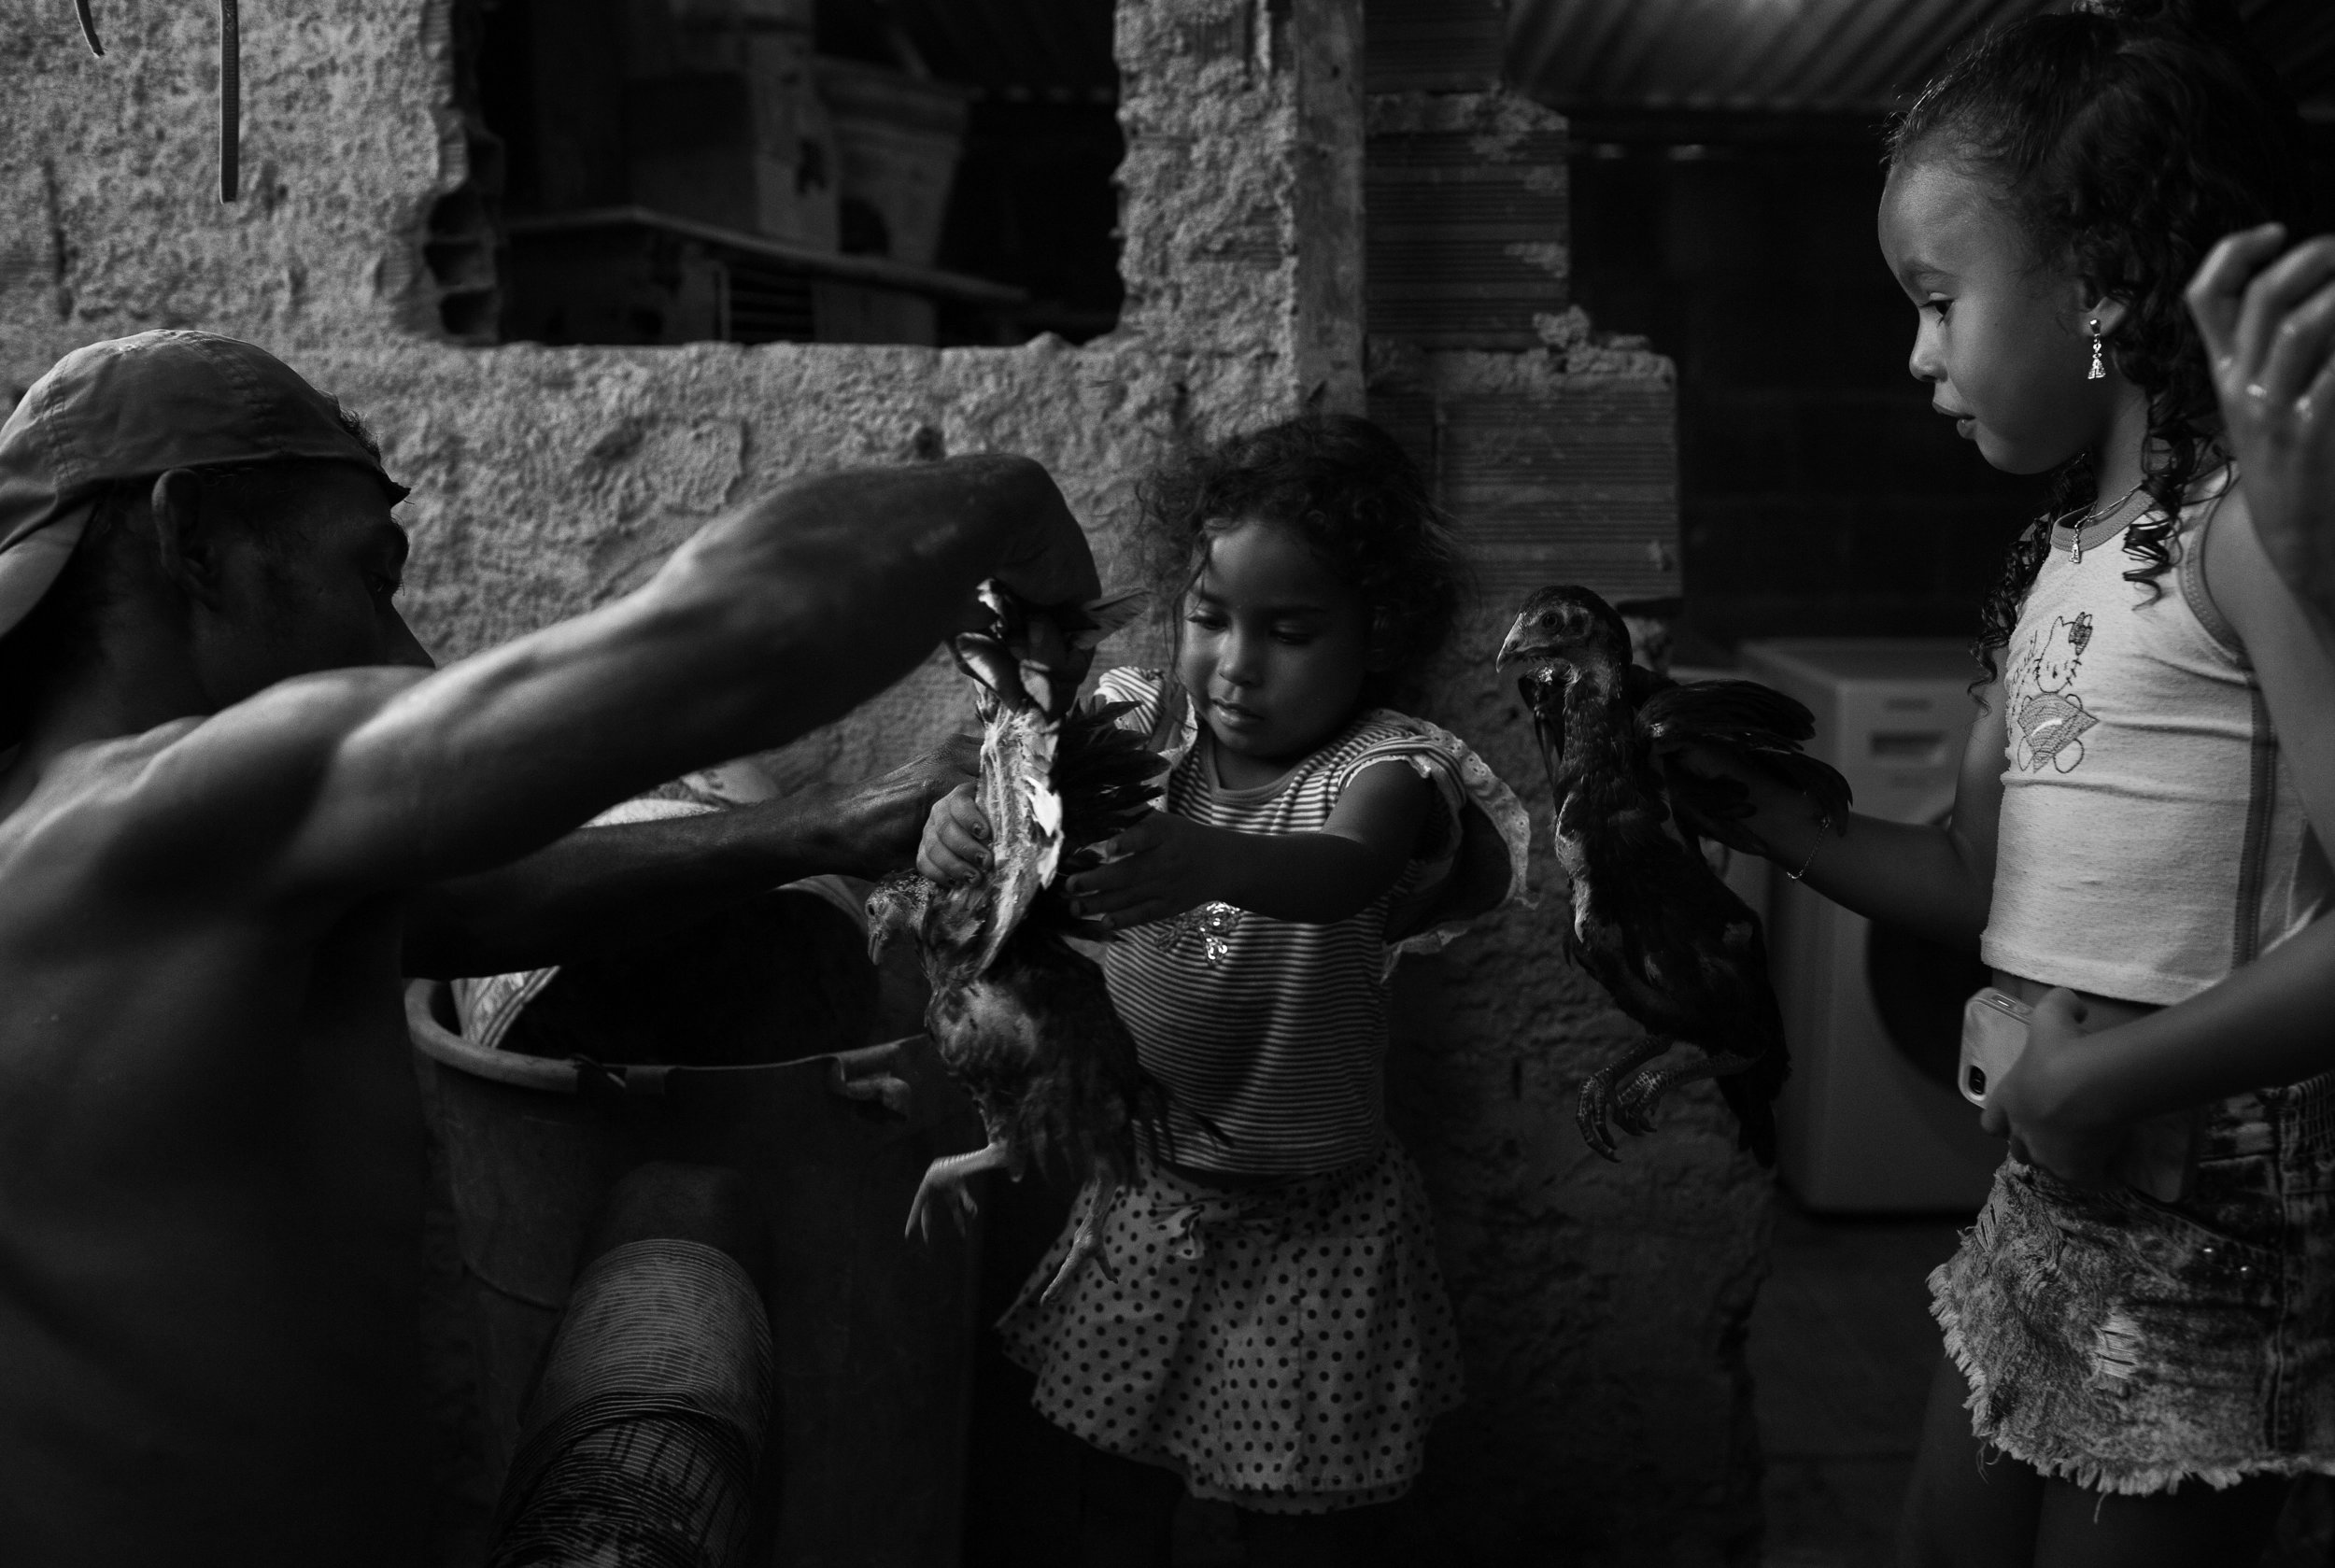  Alexandre Santiago hands his youngest daughter, Vivian, age 4, one of the family’s chickens in the backyard of their home. Alexandre is now the sole provider in the family because his wife, Alessandra de Sousa Amorim, no longer has time to work as a